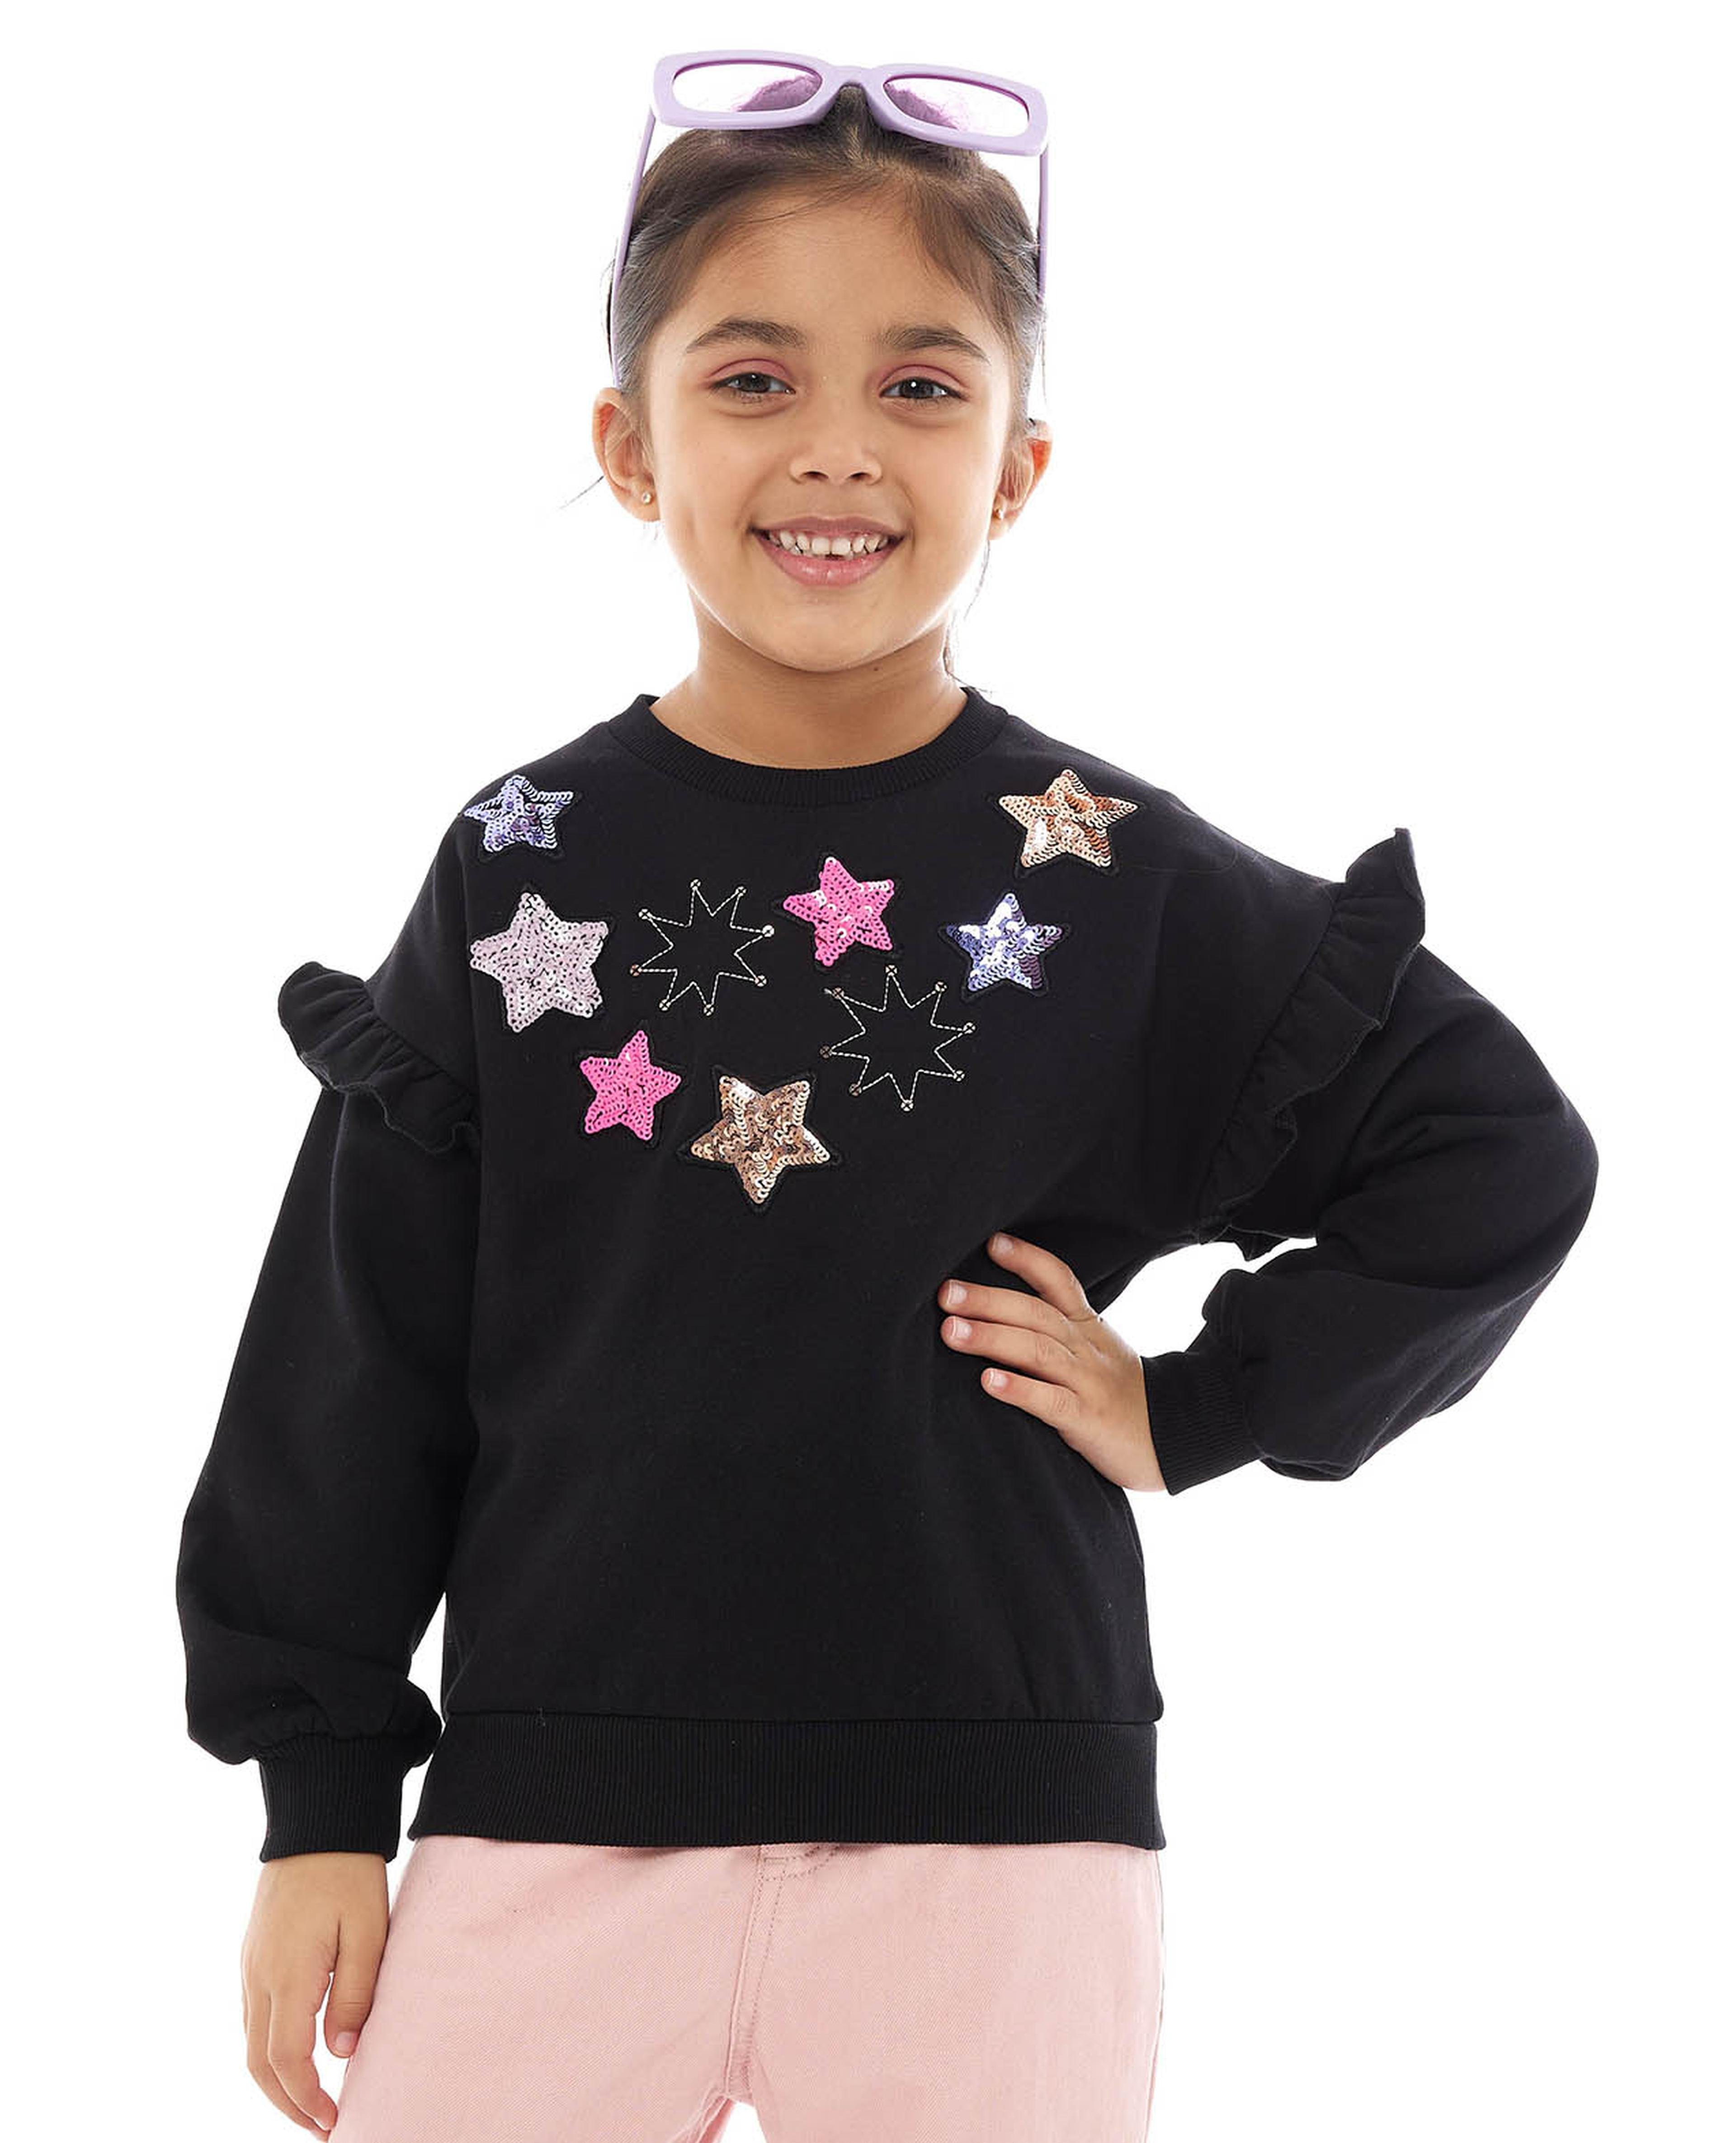 Sequined Sweatshirt with Crew Neck and Long Sleeves